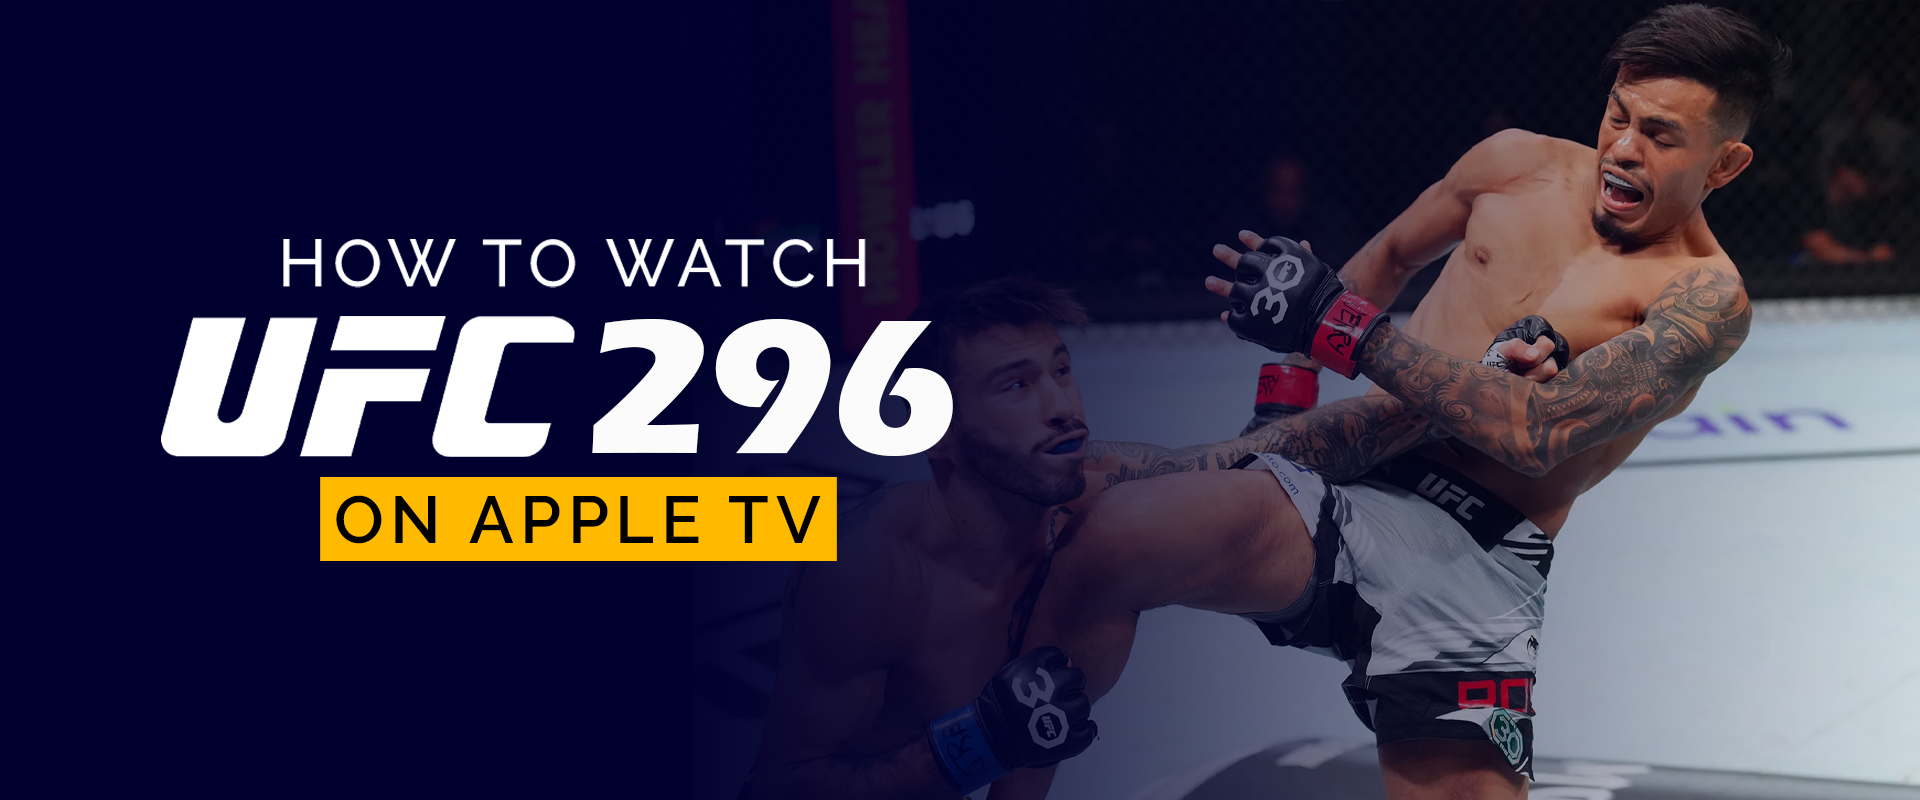 How to Watch UFC 296 on Apple TV